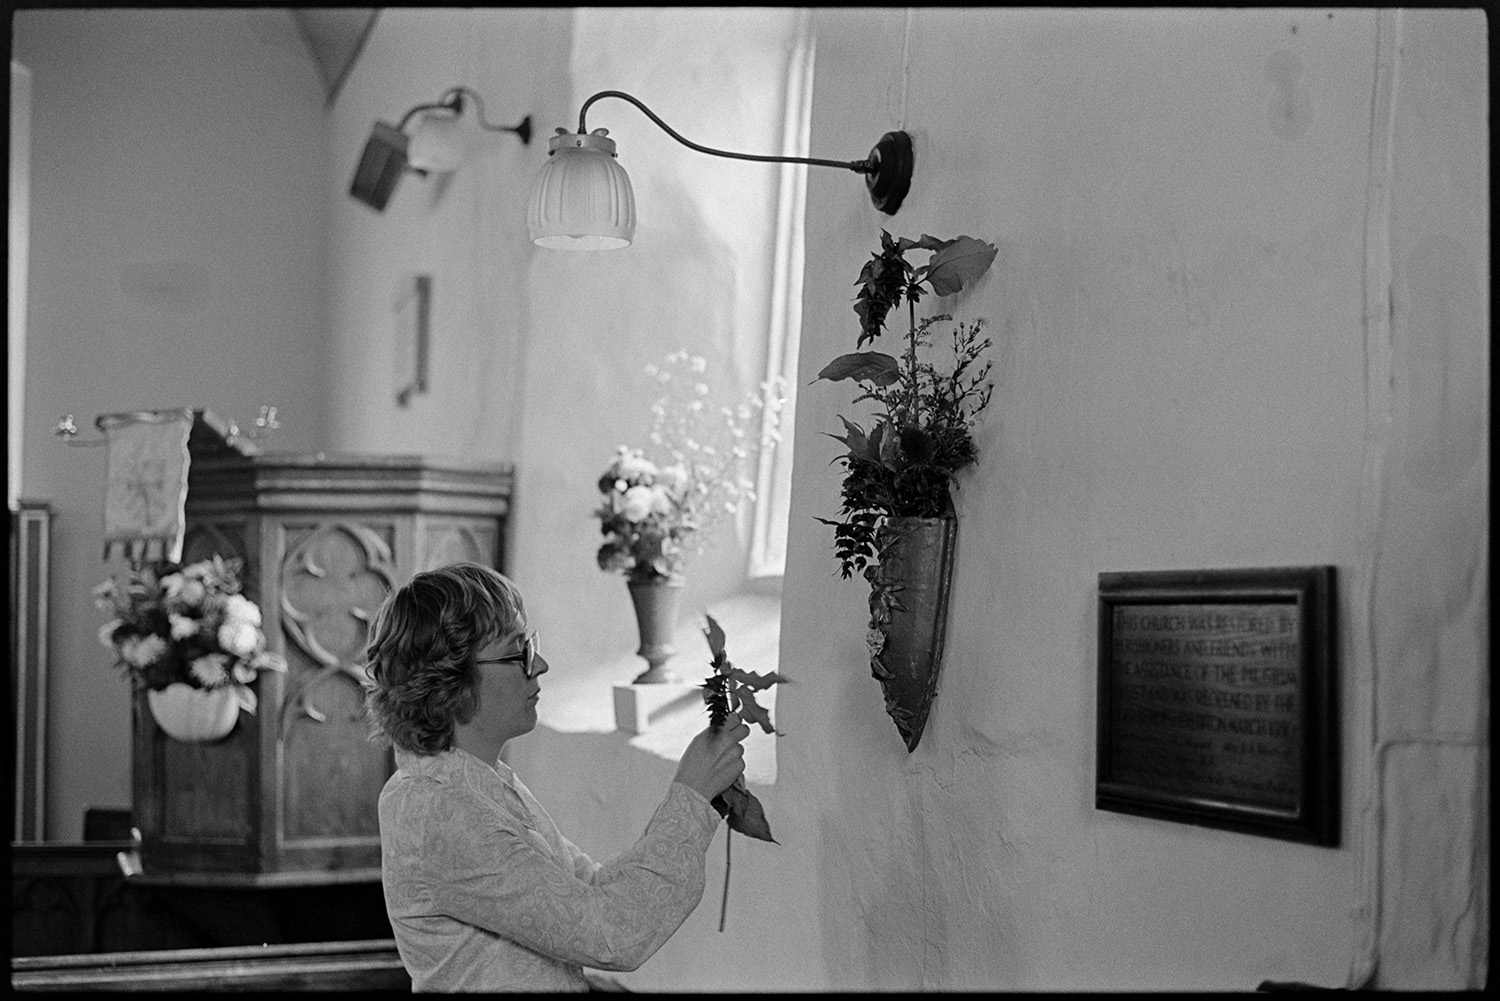 Women decorating church for Harvest Festival, flowers. Religious painting on wall. 
[Mrs Squire making a floral decoration on a wall by a plaque, at Dowland Church for the Harvest Festival. The pulpit and other flower arrangements can be seen in the background.]